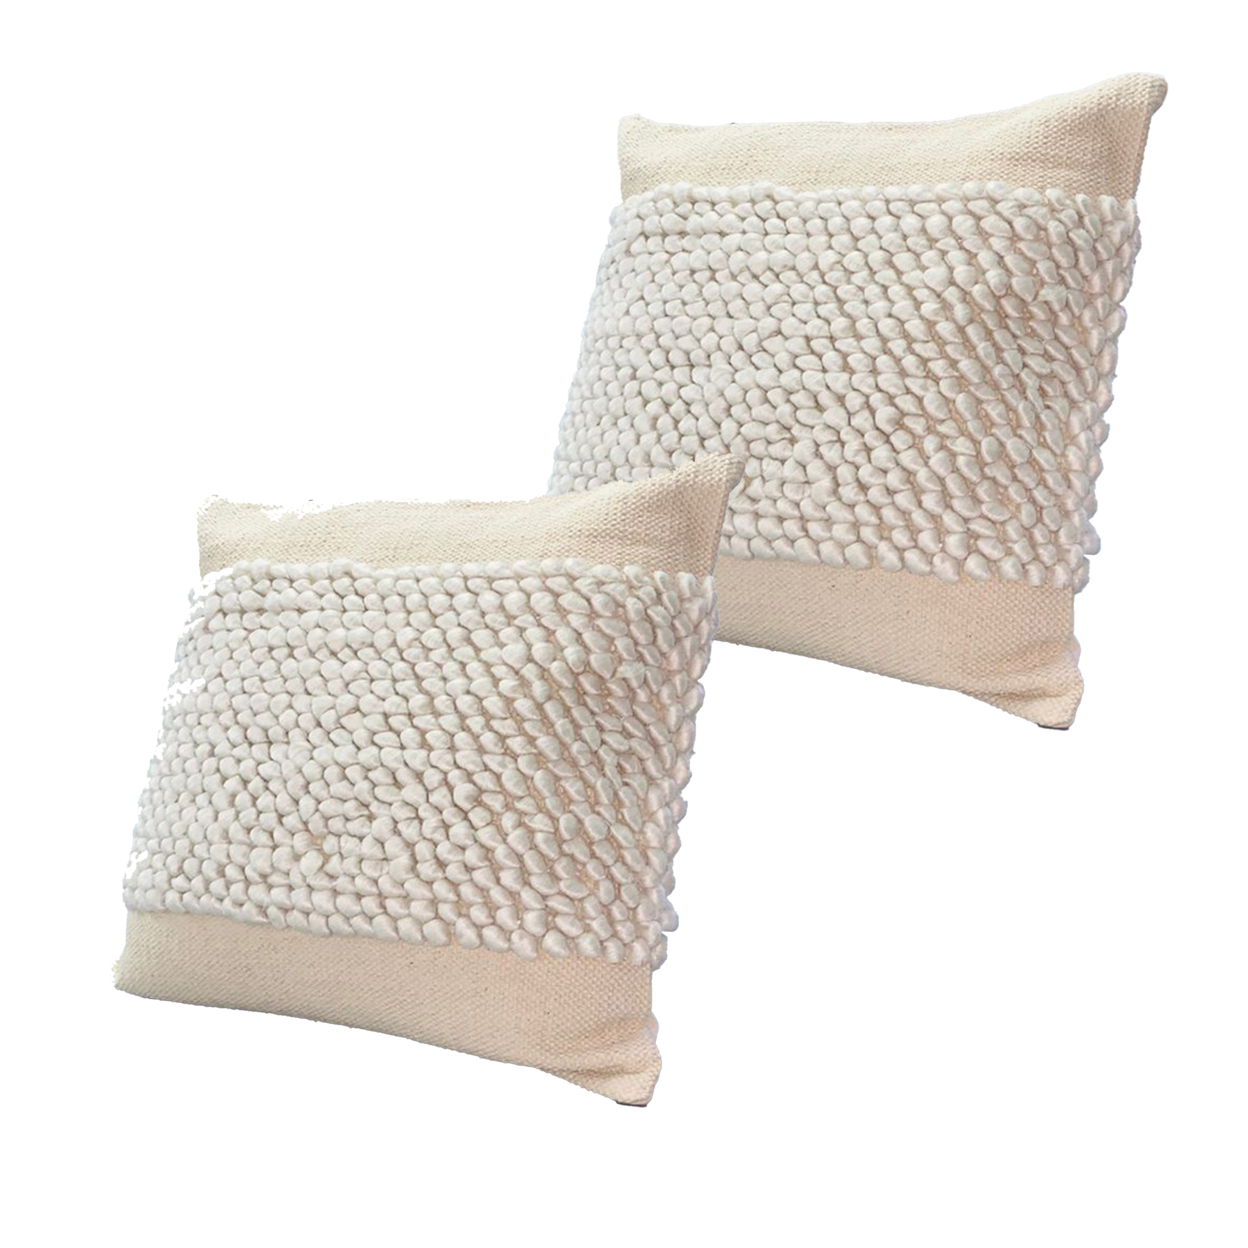 20 X 20 Square Cotton Accent Throw Pillows, Braided Patchwork, Set Of 2, White, Cream